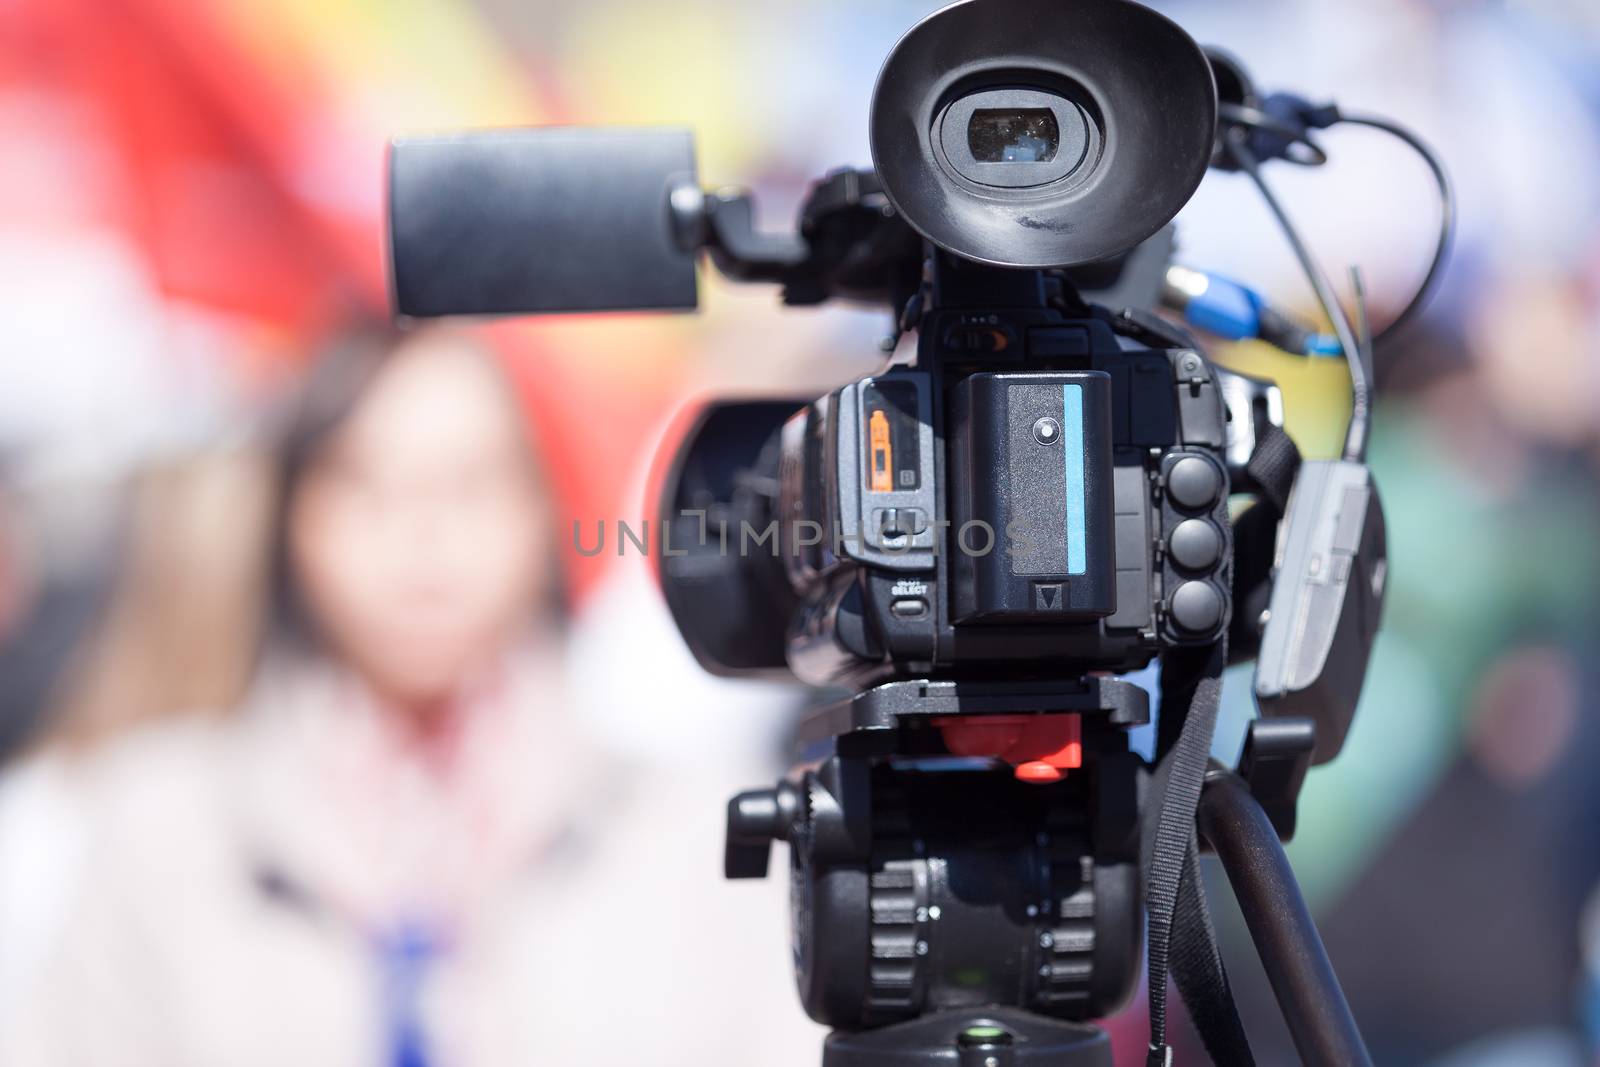 Television camera in the focus, blurred female journalist in the background. TV broadcasting.